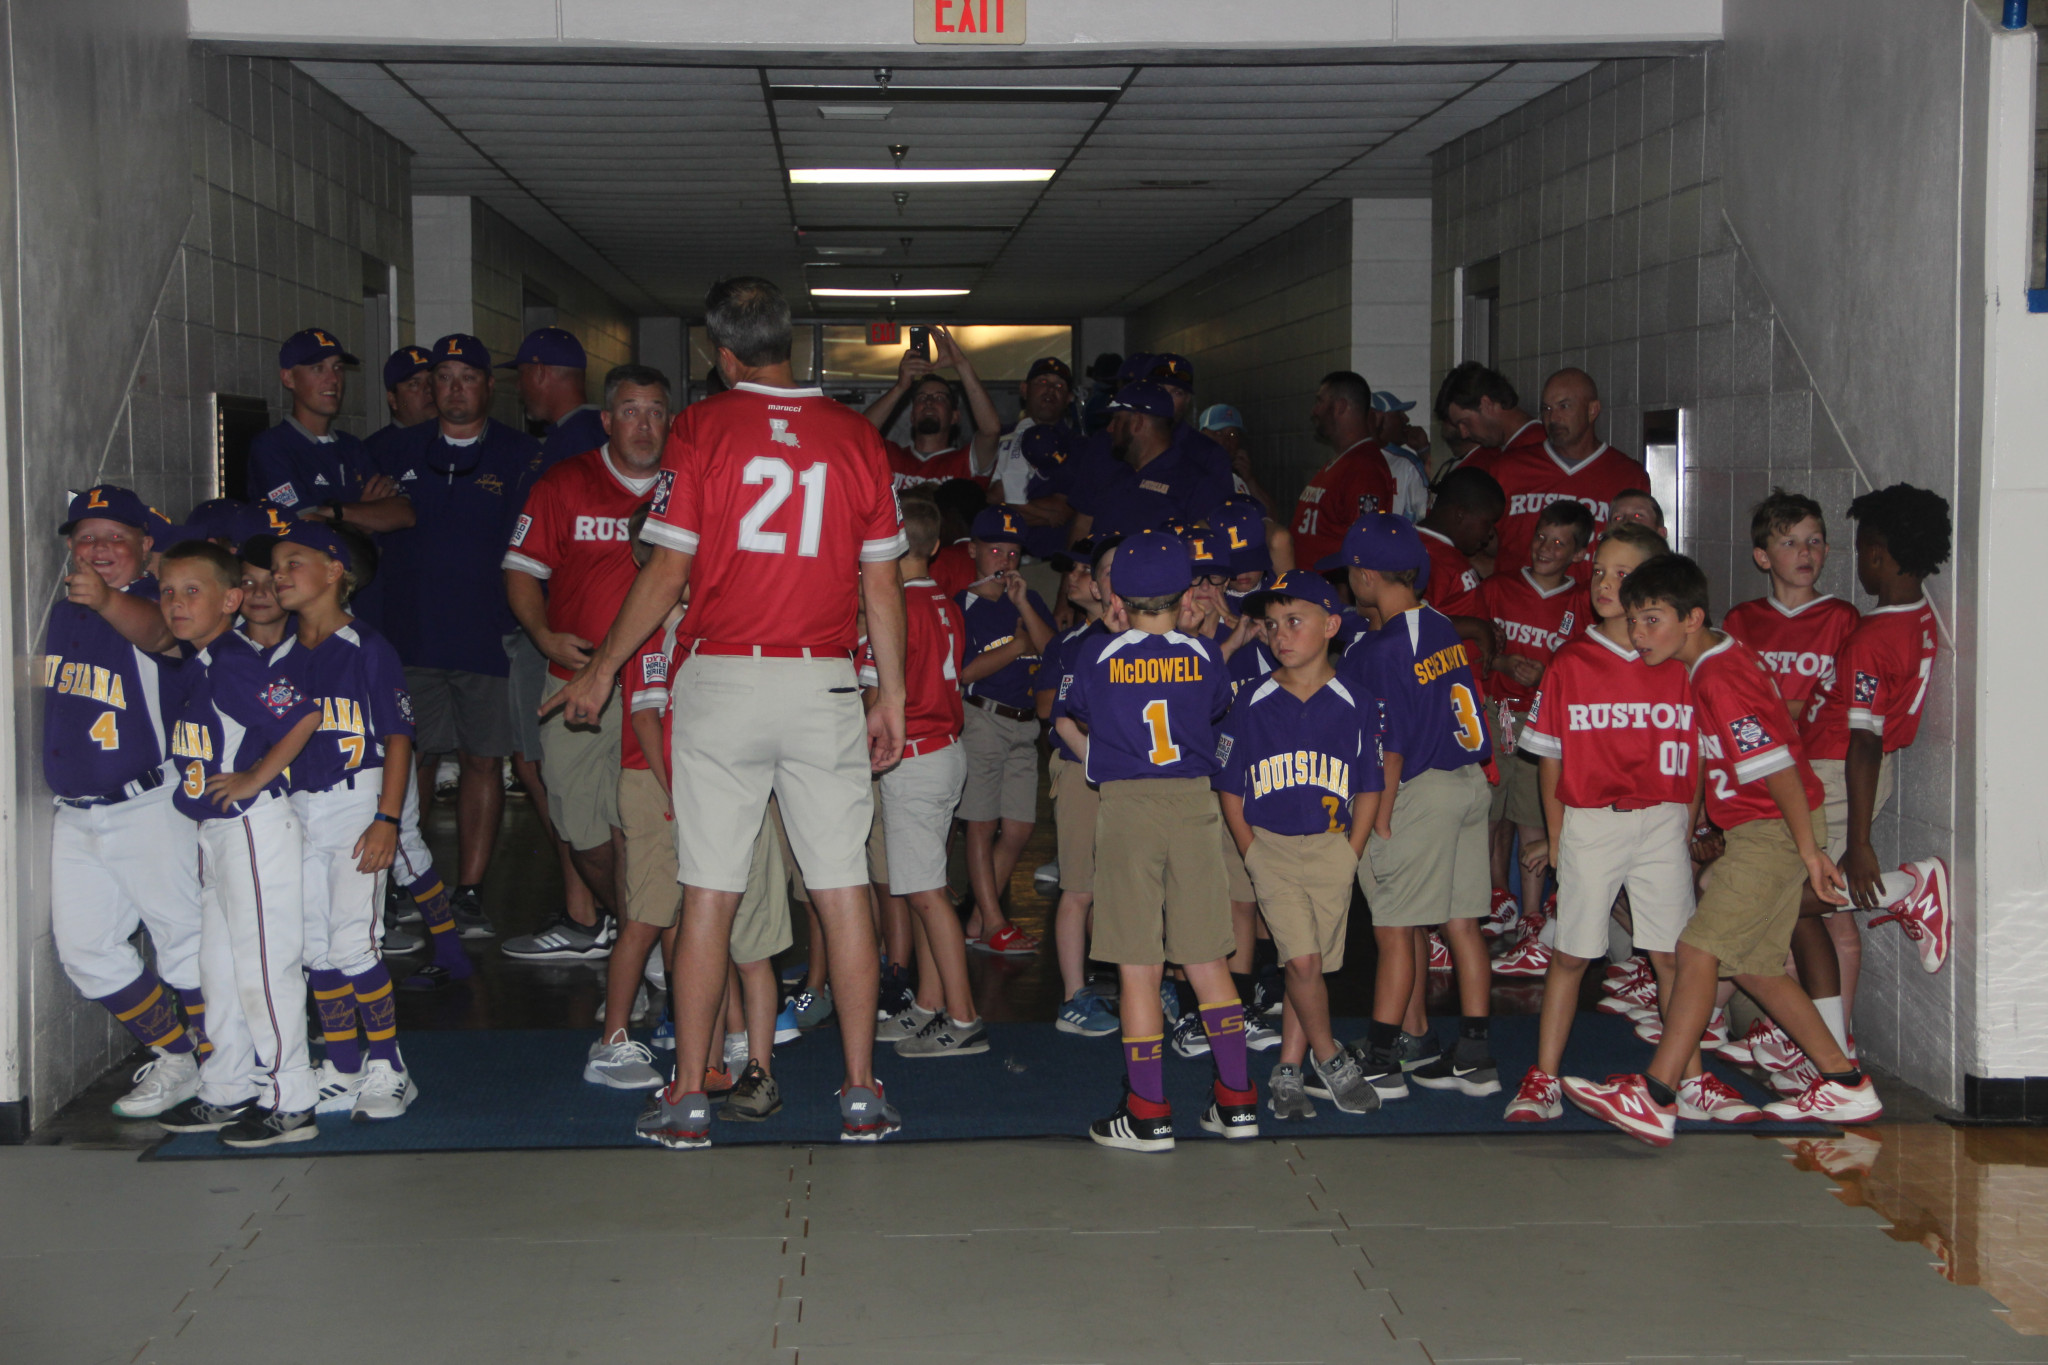 Team Louisiana (wearing purple) and Team Ruston (wearing red) wait for Friday’s opening ceremony to begin.